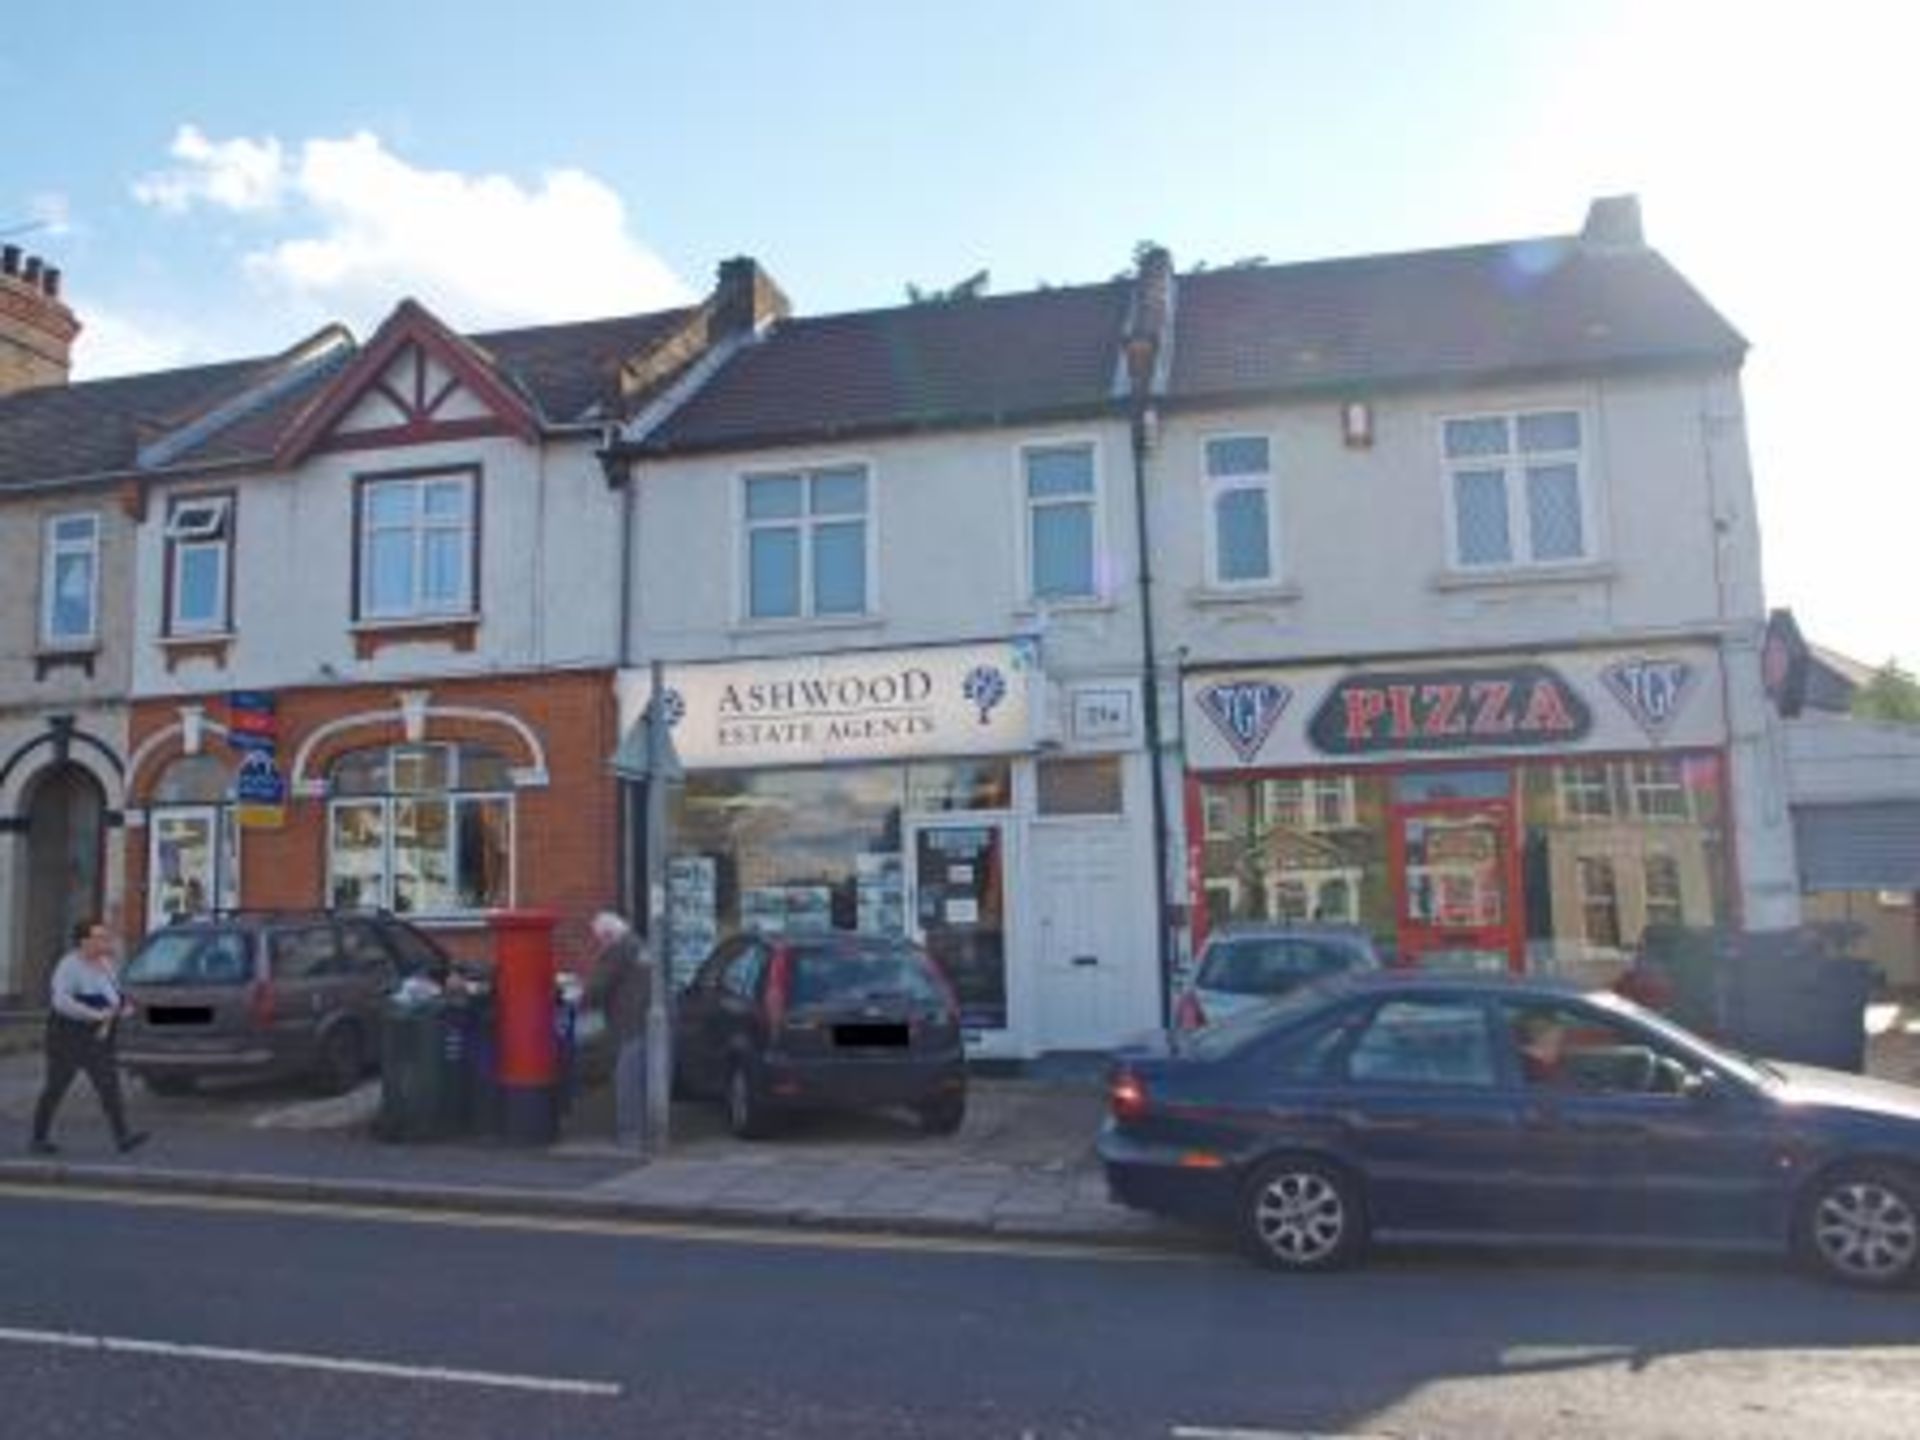 21 & 21A THE BRENT, DARTFORD, KENT, DA1 1YD Gravesend & Dartford Areas FREEHOLD COMMERCIAL AND